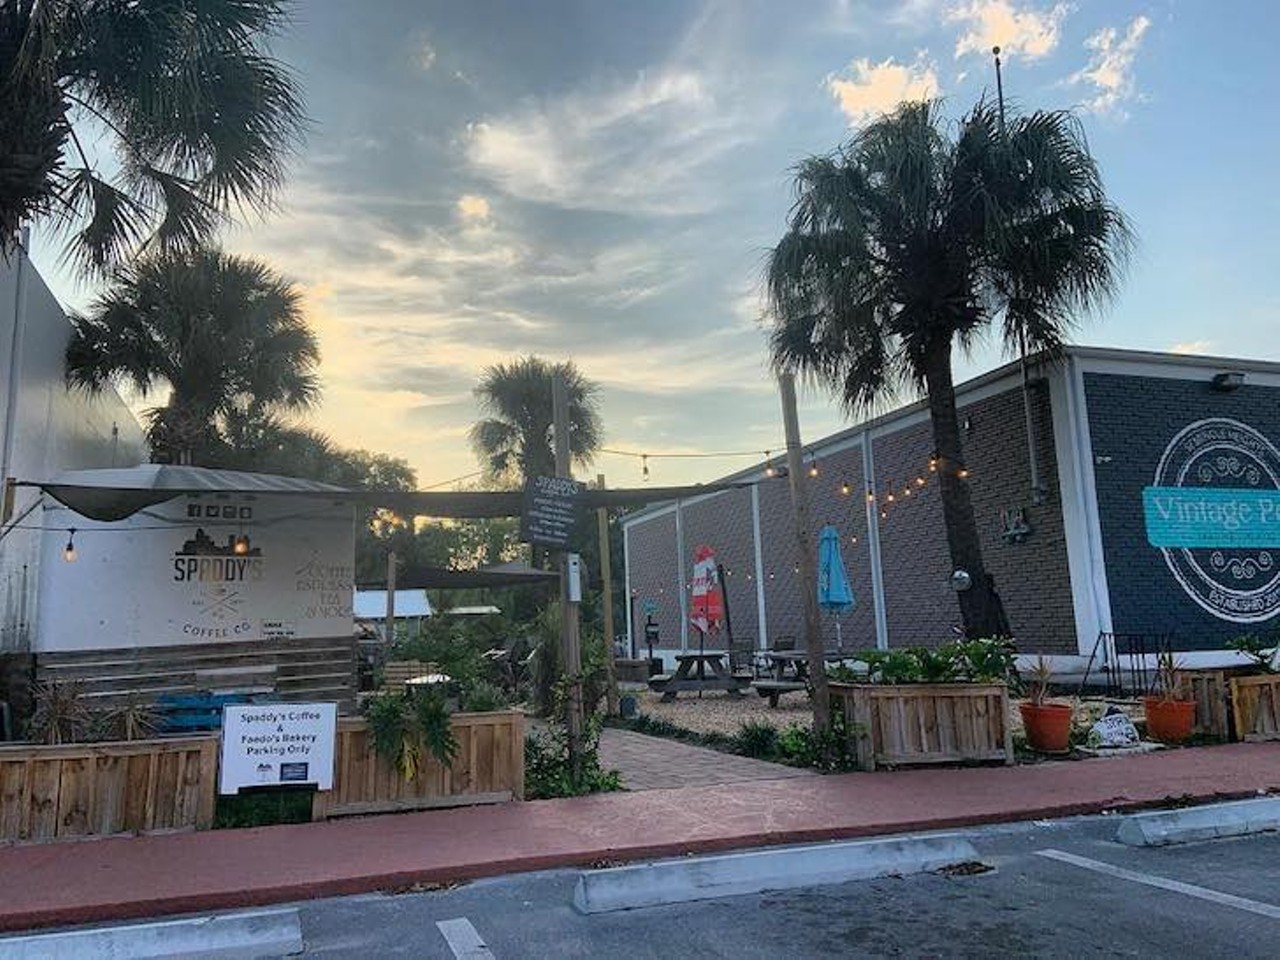 Spaddy&#146;s Coffee Co.  
5206 N Florida Ave, Tampa, 954-829-2111
Focusing on their commitment to quality, Spaddy&#146;s offers an array of specialty and traditional coffee beverages.
Photo via Spaddy&#146;s Coffee Co./Facebook